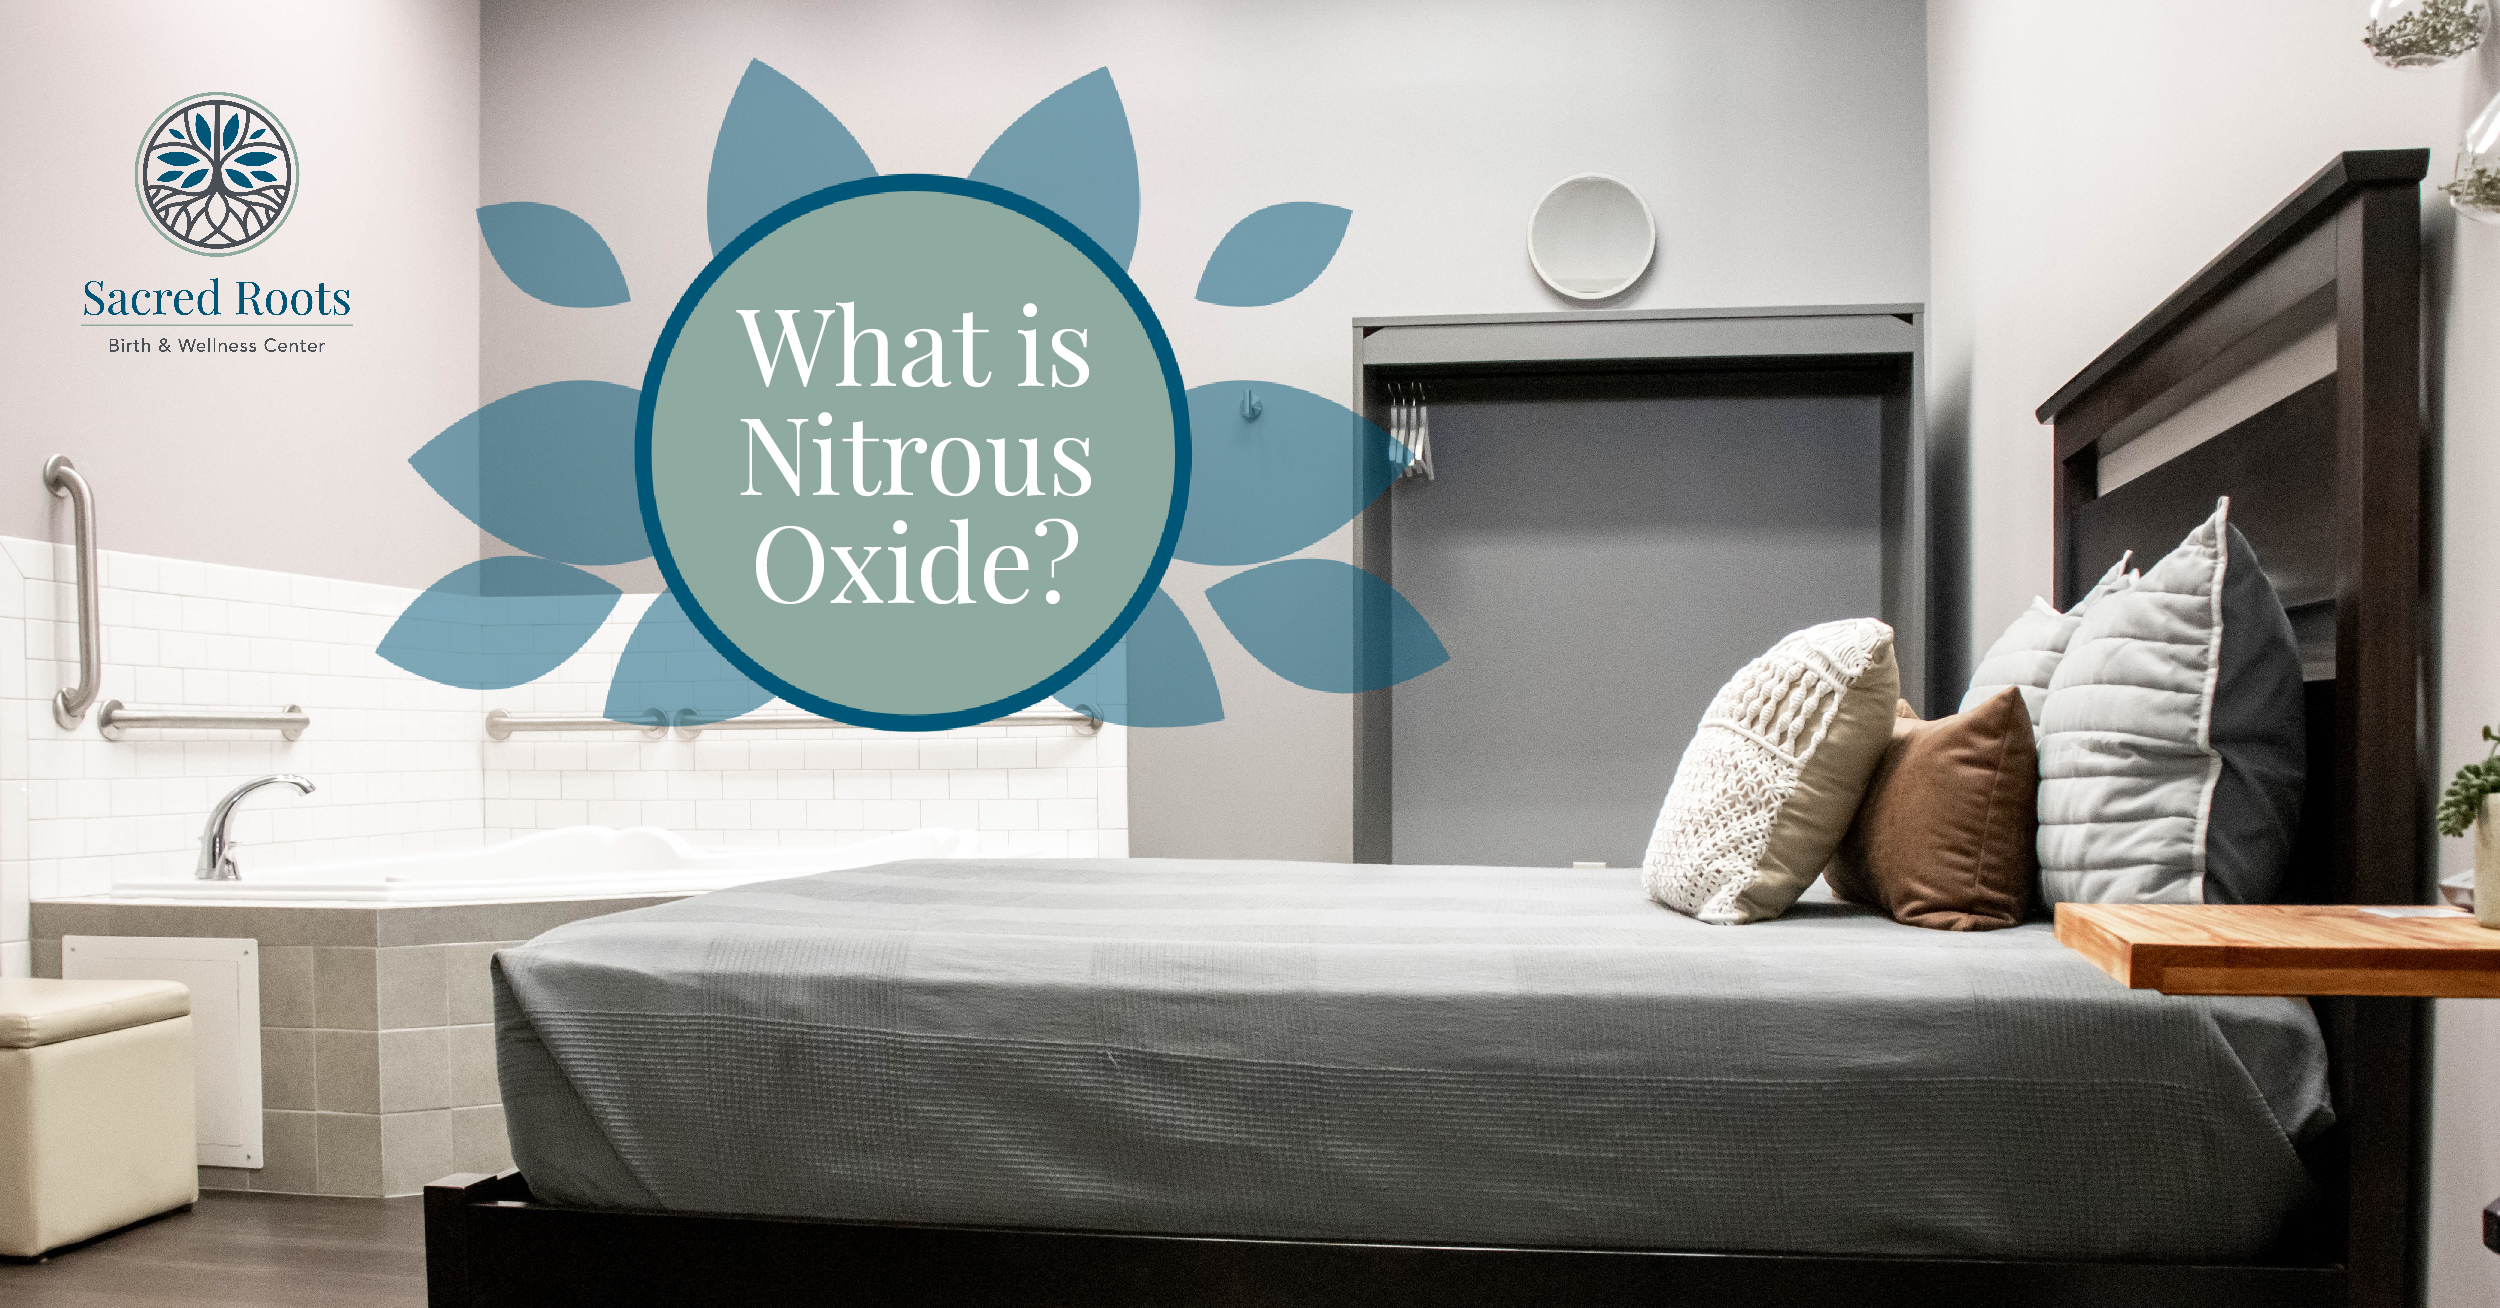 What is Nitrous Oxide?